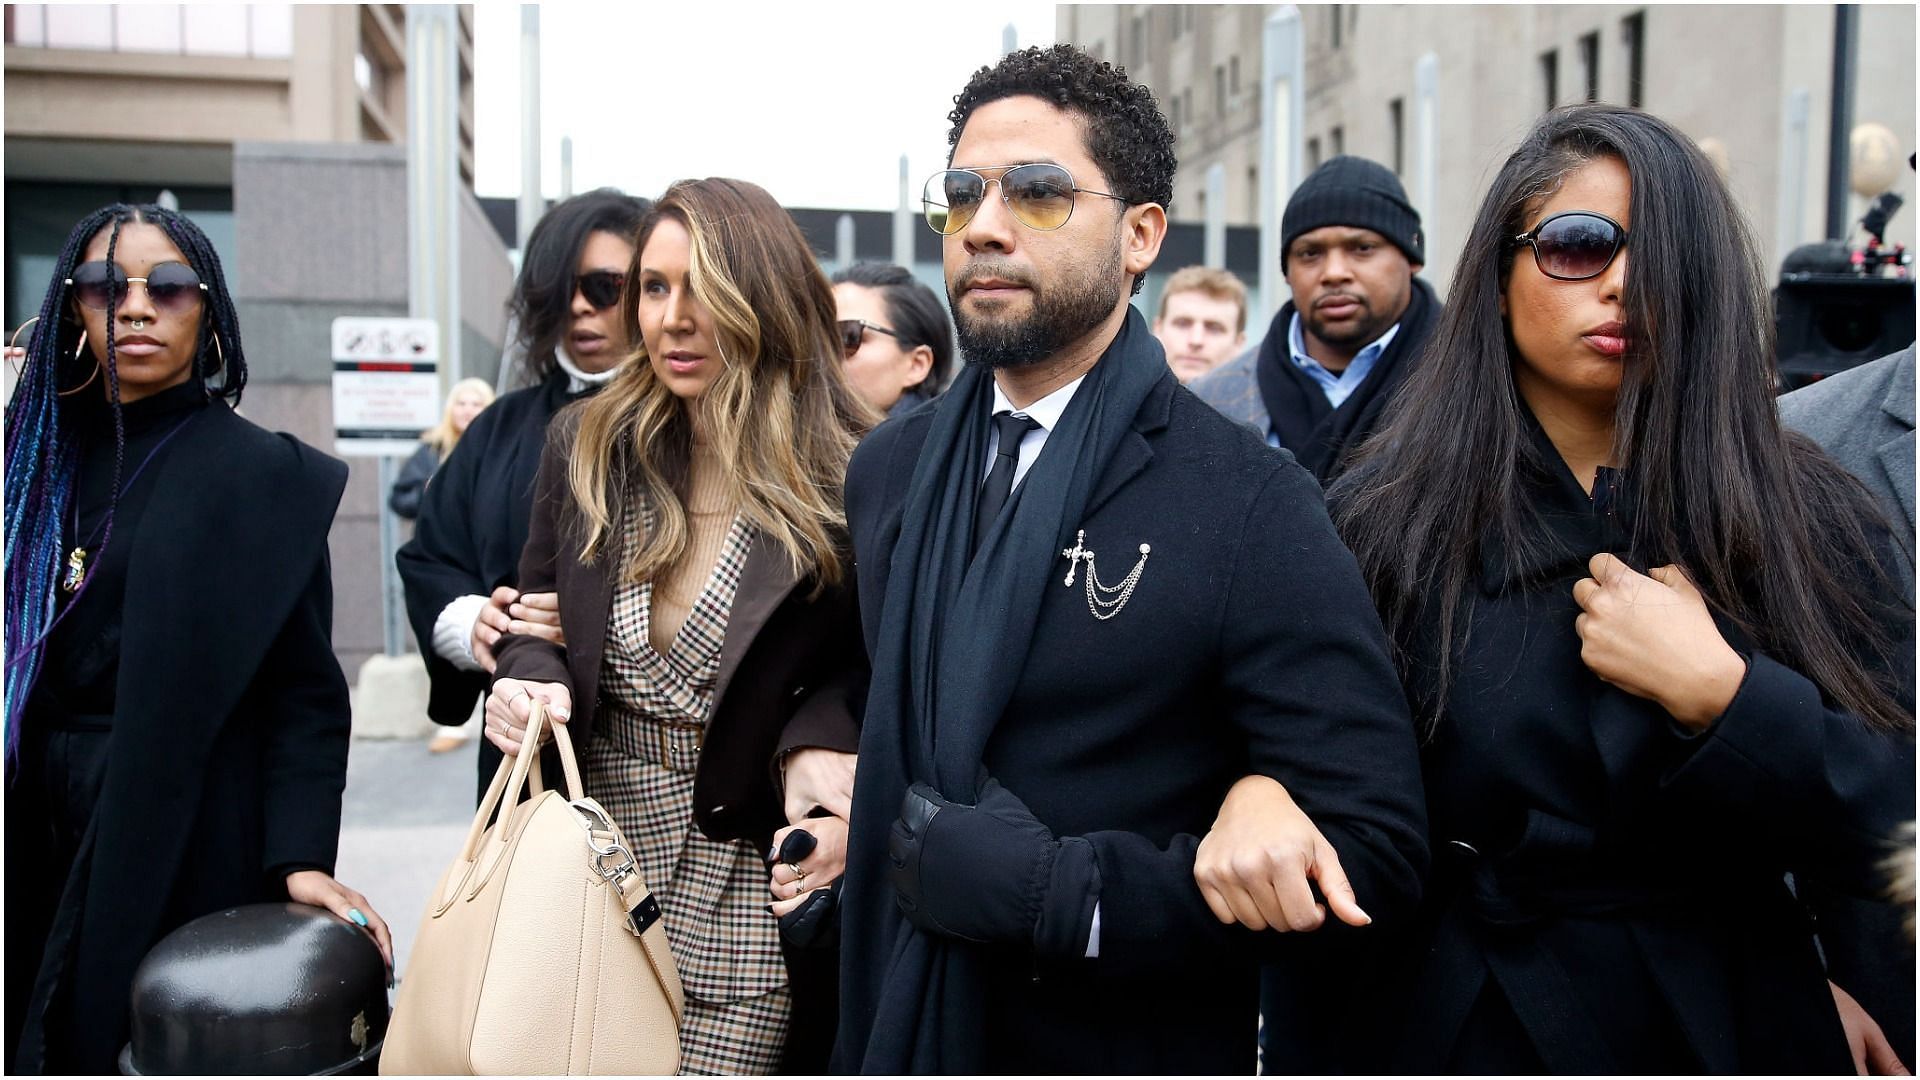 Jussie Smollett leaving Leighton Criminal Courthouse (Image by Nuccio DiNuzzo via Getty Images)